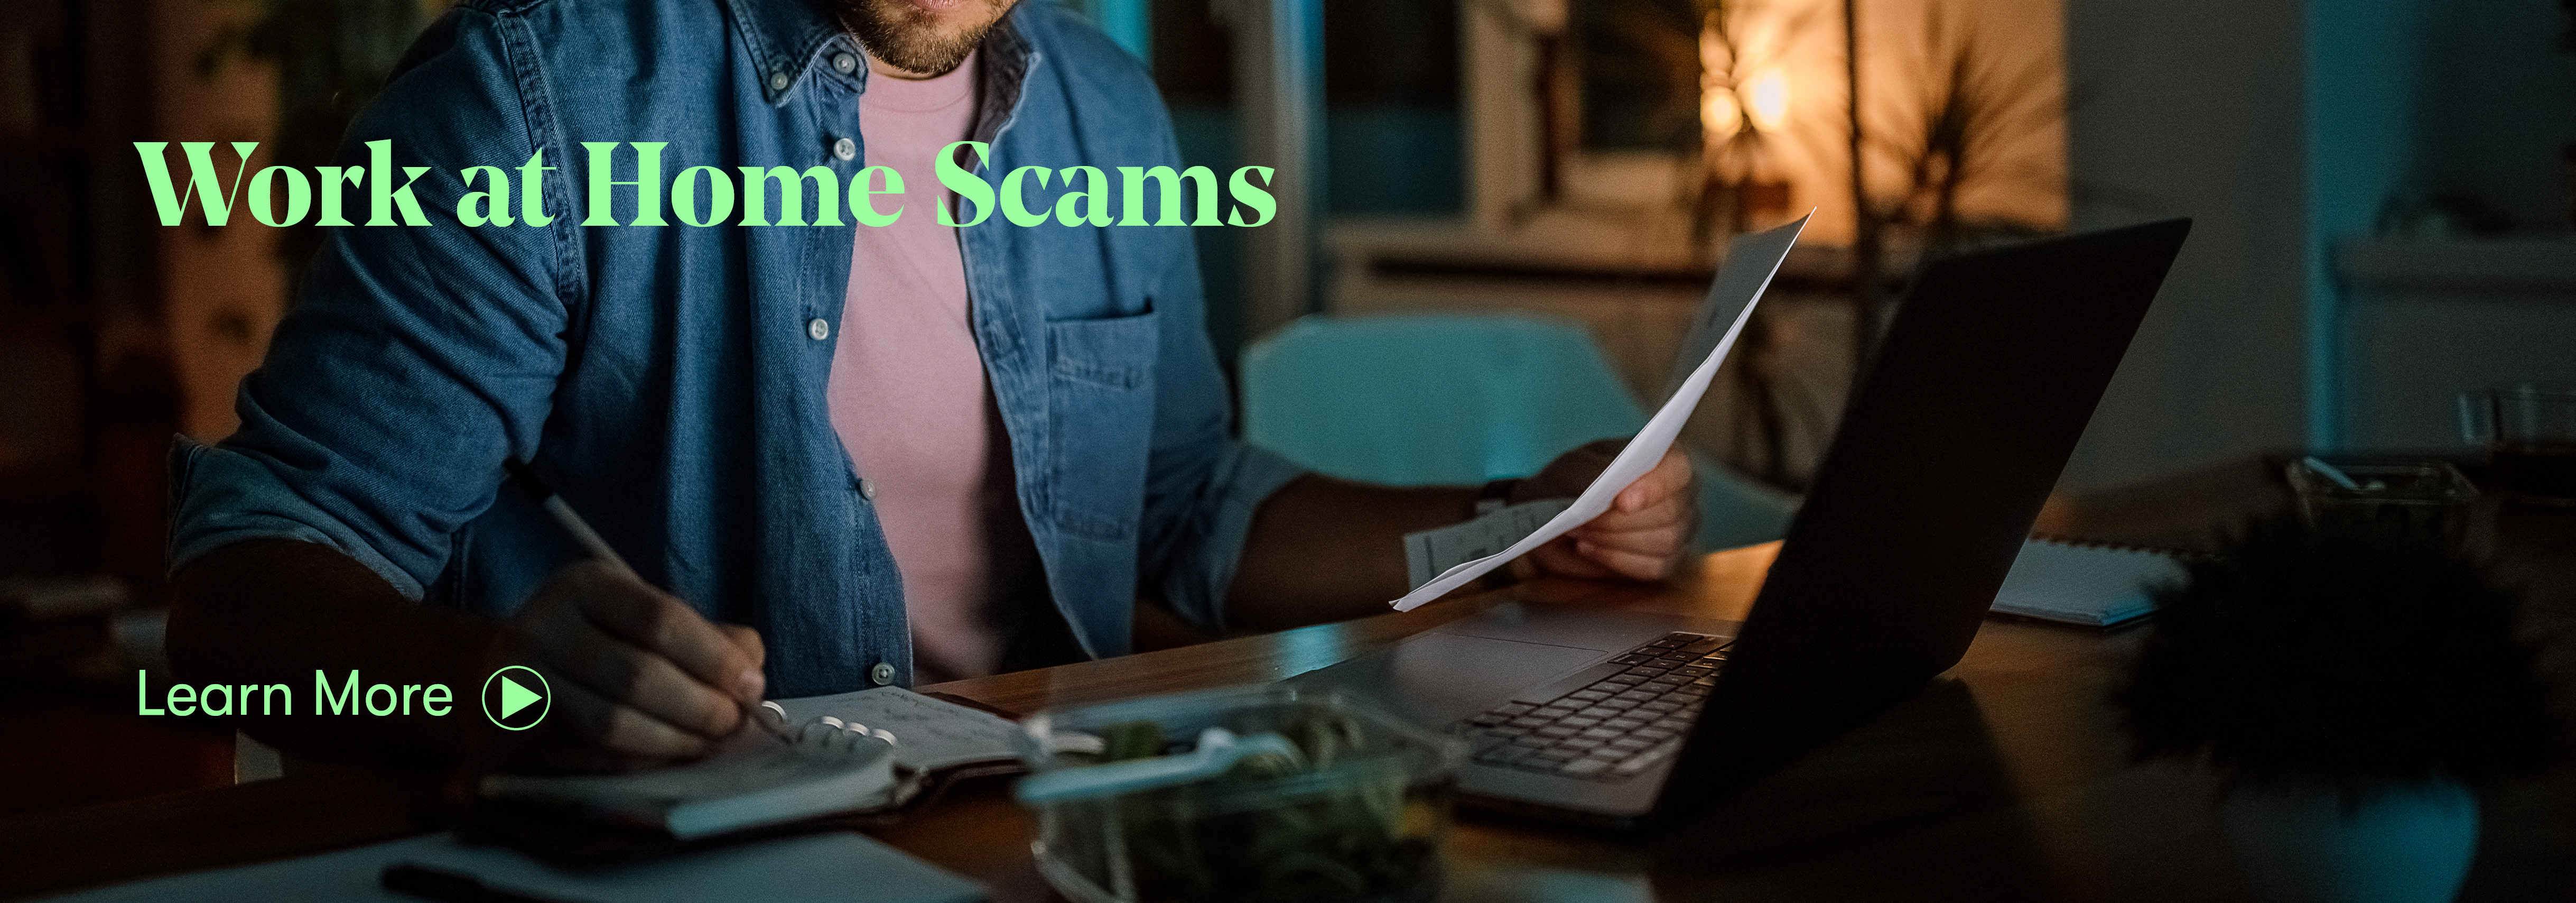 work at home scams Image